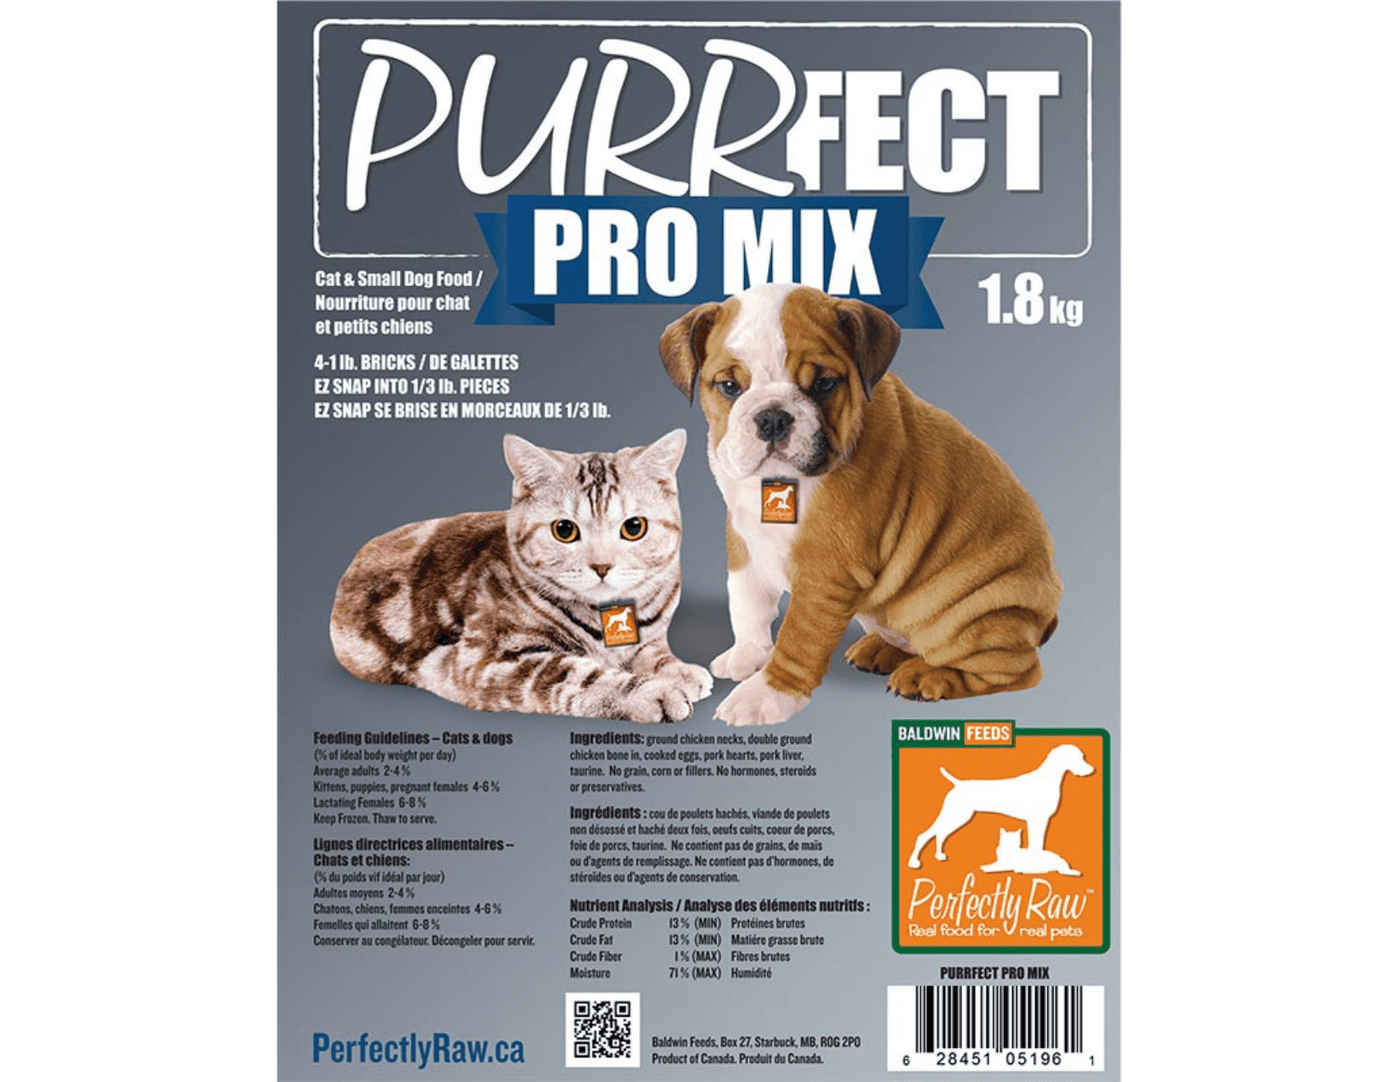 Purrfect Pro Mix (for cats and small dogs) (Perfectly Raw™)